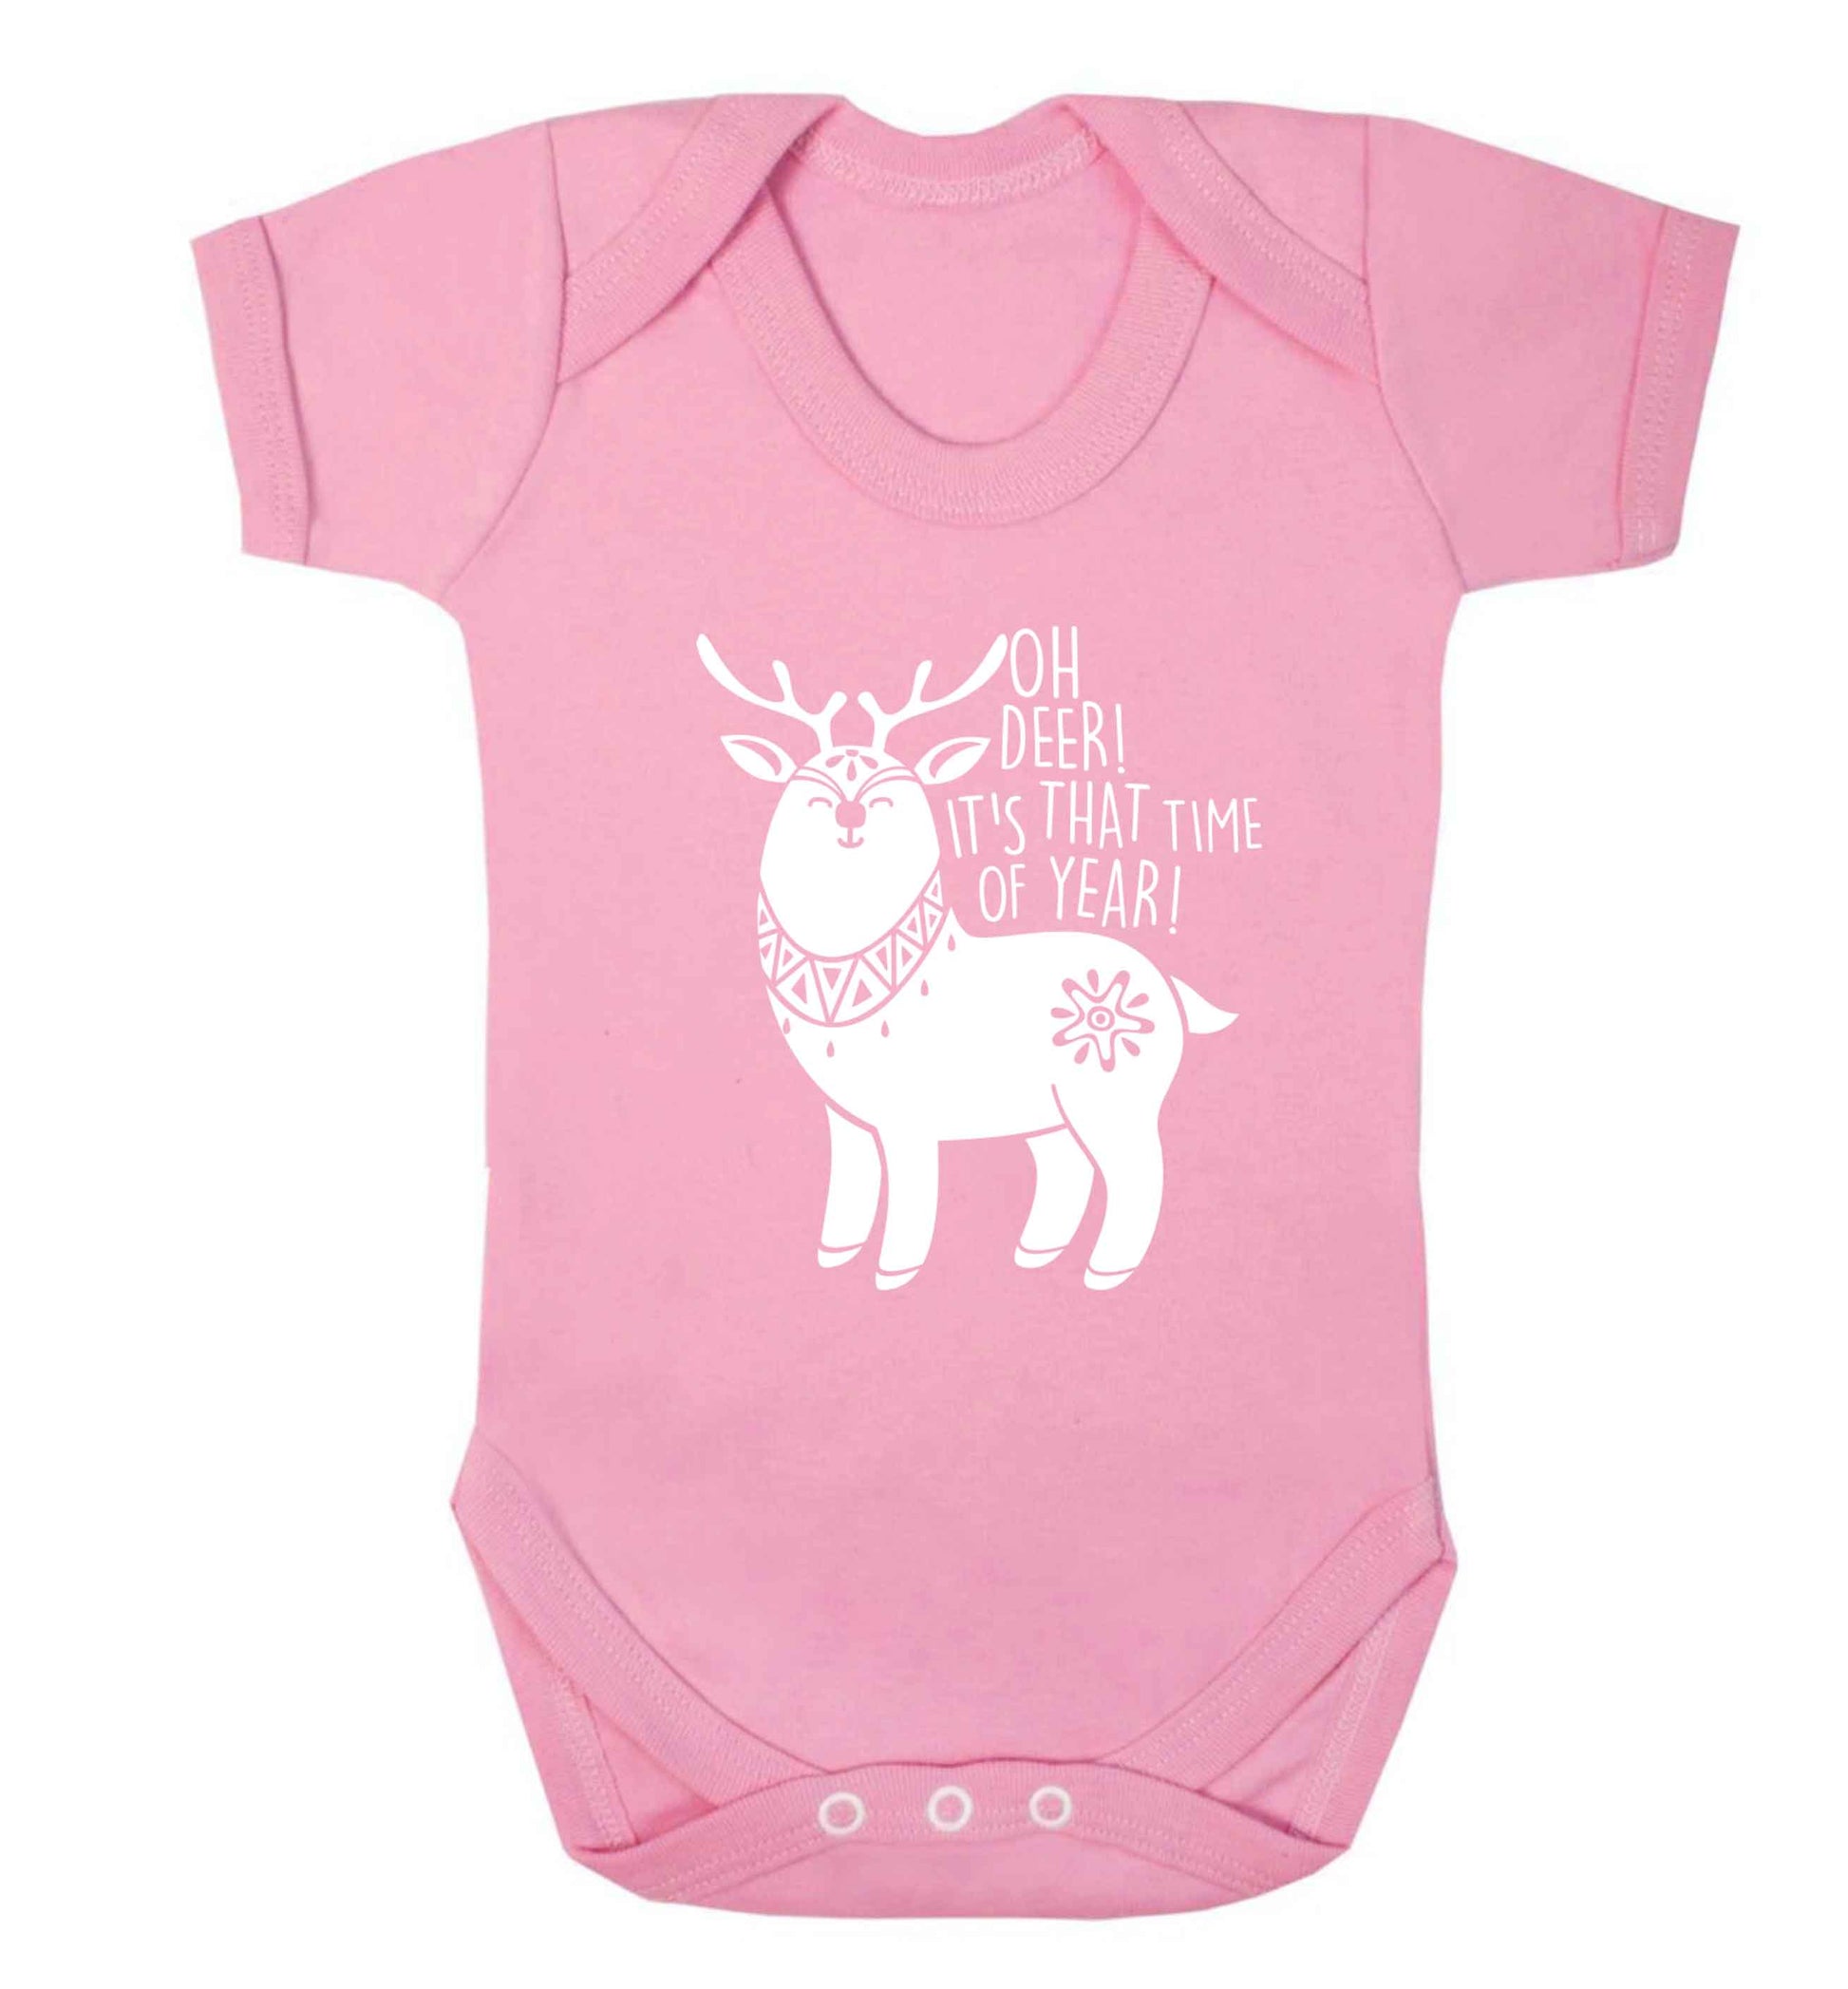 Oh dear it's that time of year Baby Vest pale pink 18-24 months